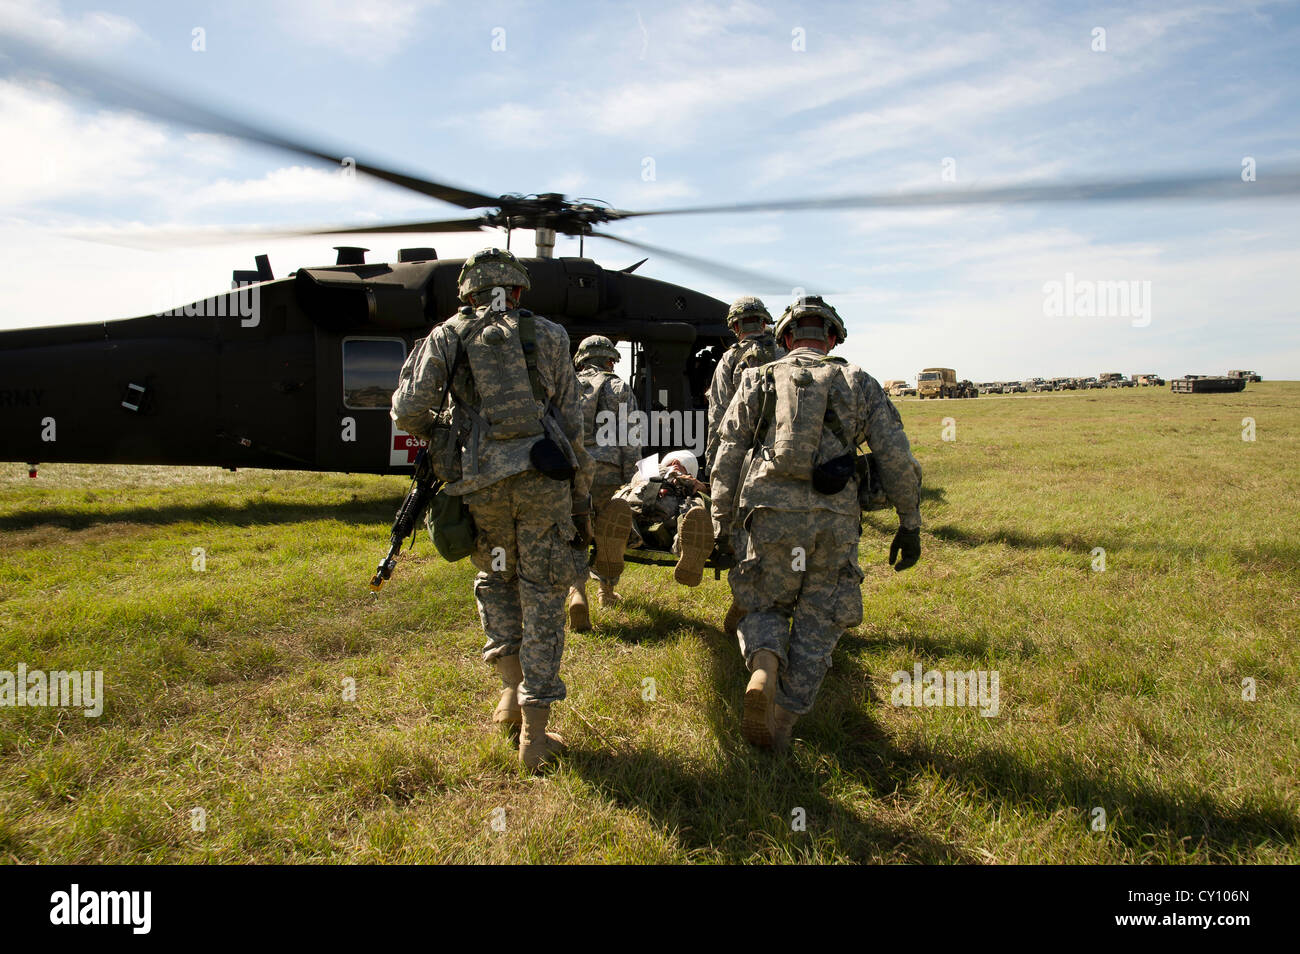 U.S. Army Soldiers load a simulated patient onto a UH-60M Black Hawk helicopter during a field exercise at the Joint Readiness Training Center (JRTC), Fort Polk, La., Oct. 15, 2012. JRTC 13-01 is designed to prepare and educate U.S. military Service members for deployments to the Middle East. Stock Photo